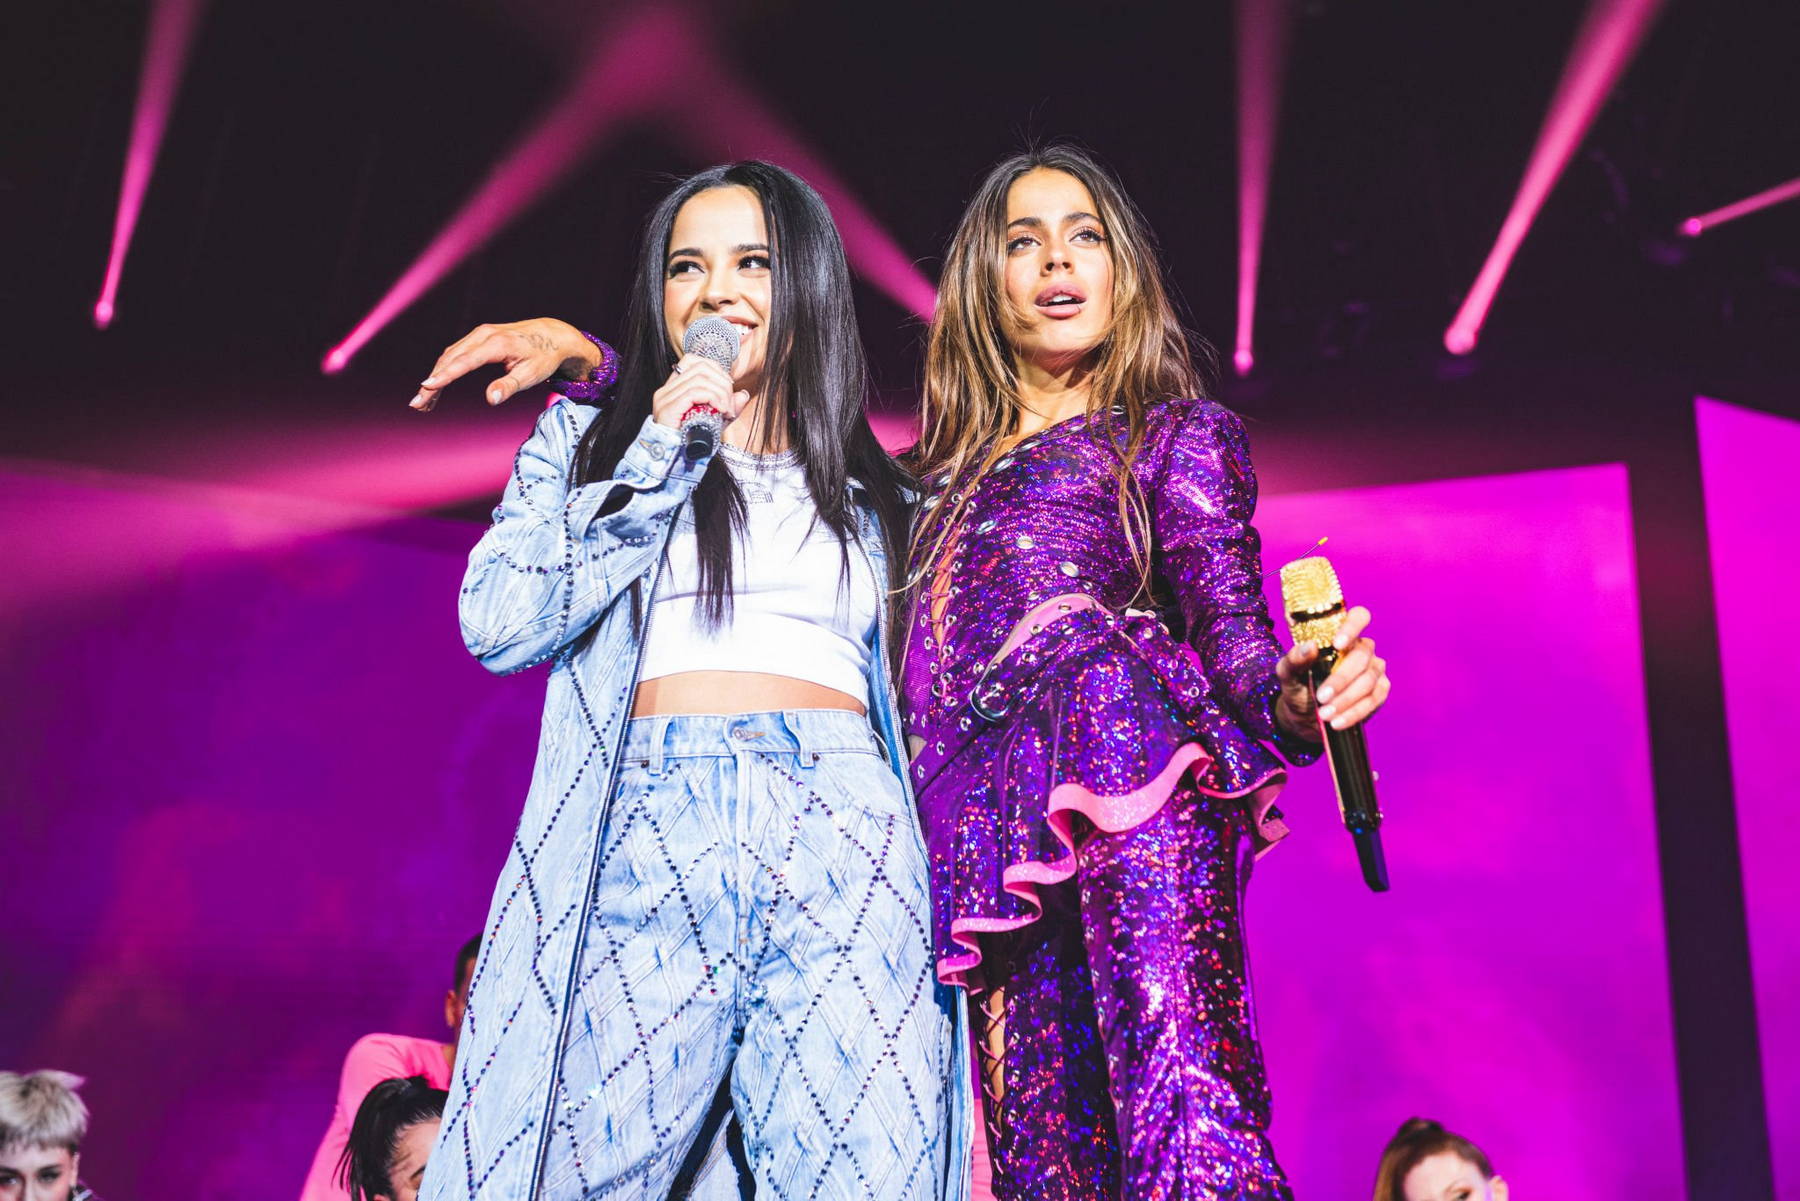 Becky G and Tini Stoessel perform on stage at Wizink Center in Madrid, Spain